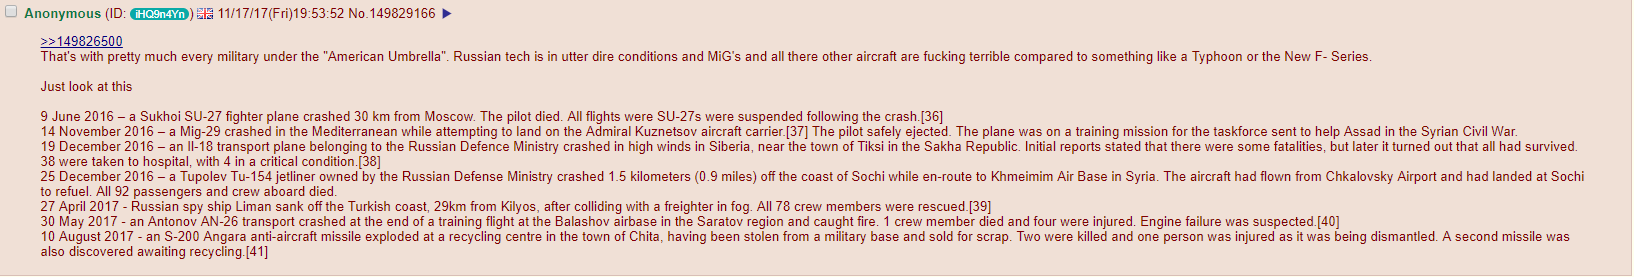 russianaccidents.png